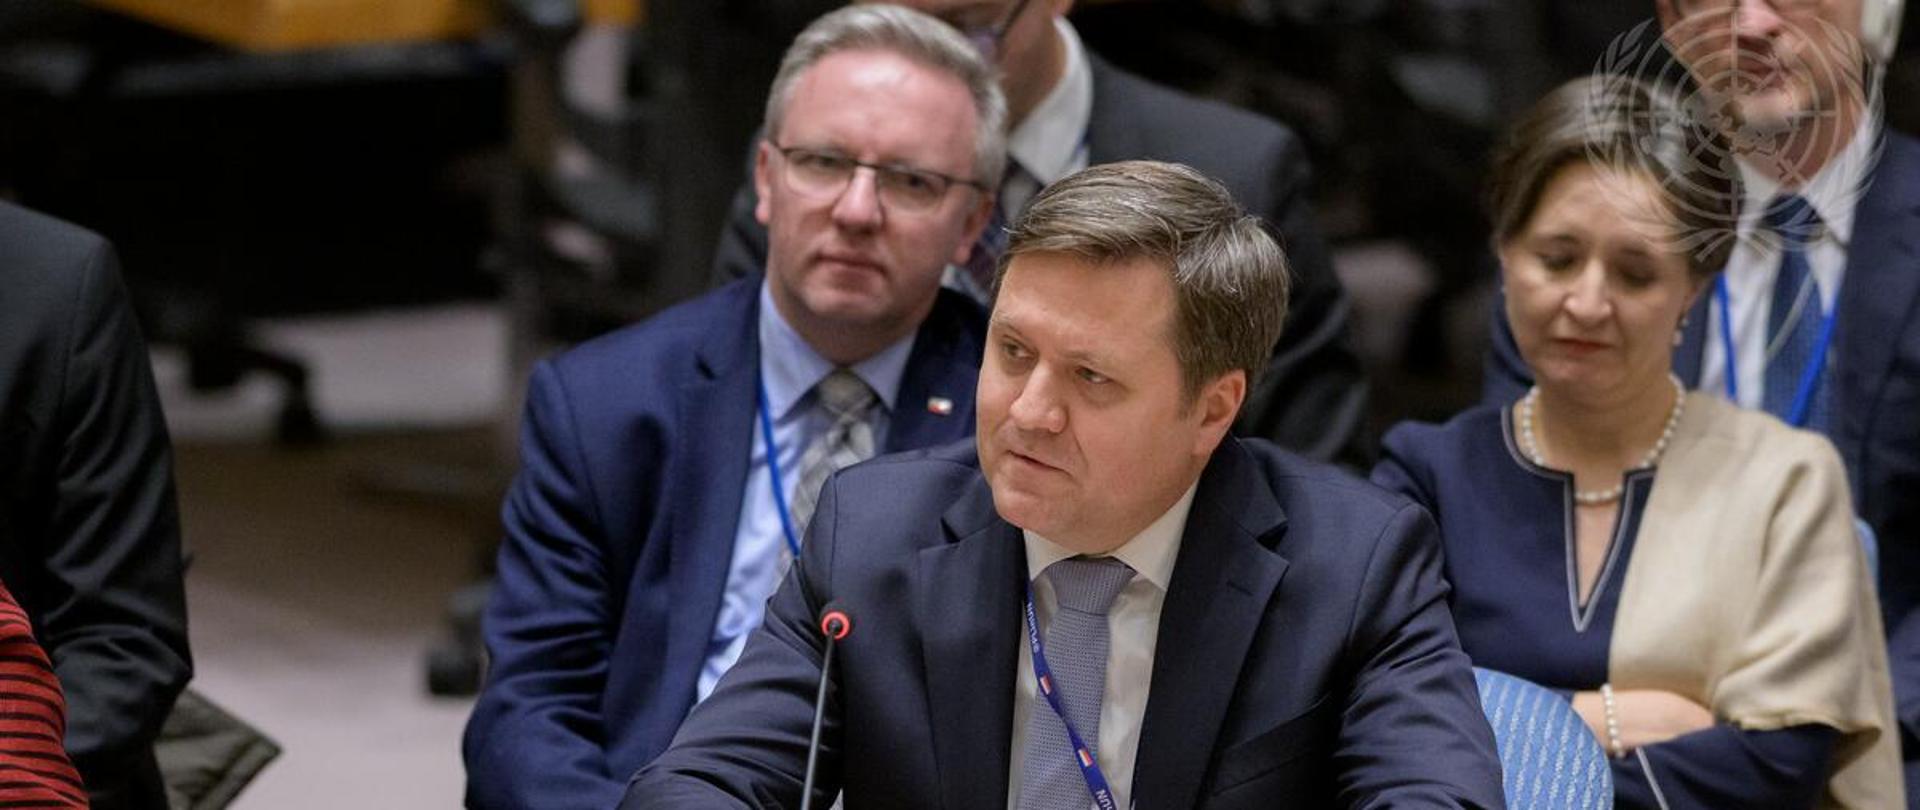 Wojciech Gerwel, Deputy Minister for Foreign Affairs of Poland, addresses the Security Council meeting on maintenance of peace and security of Ukraine.